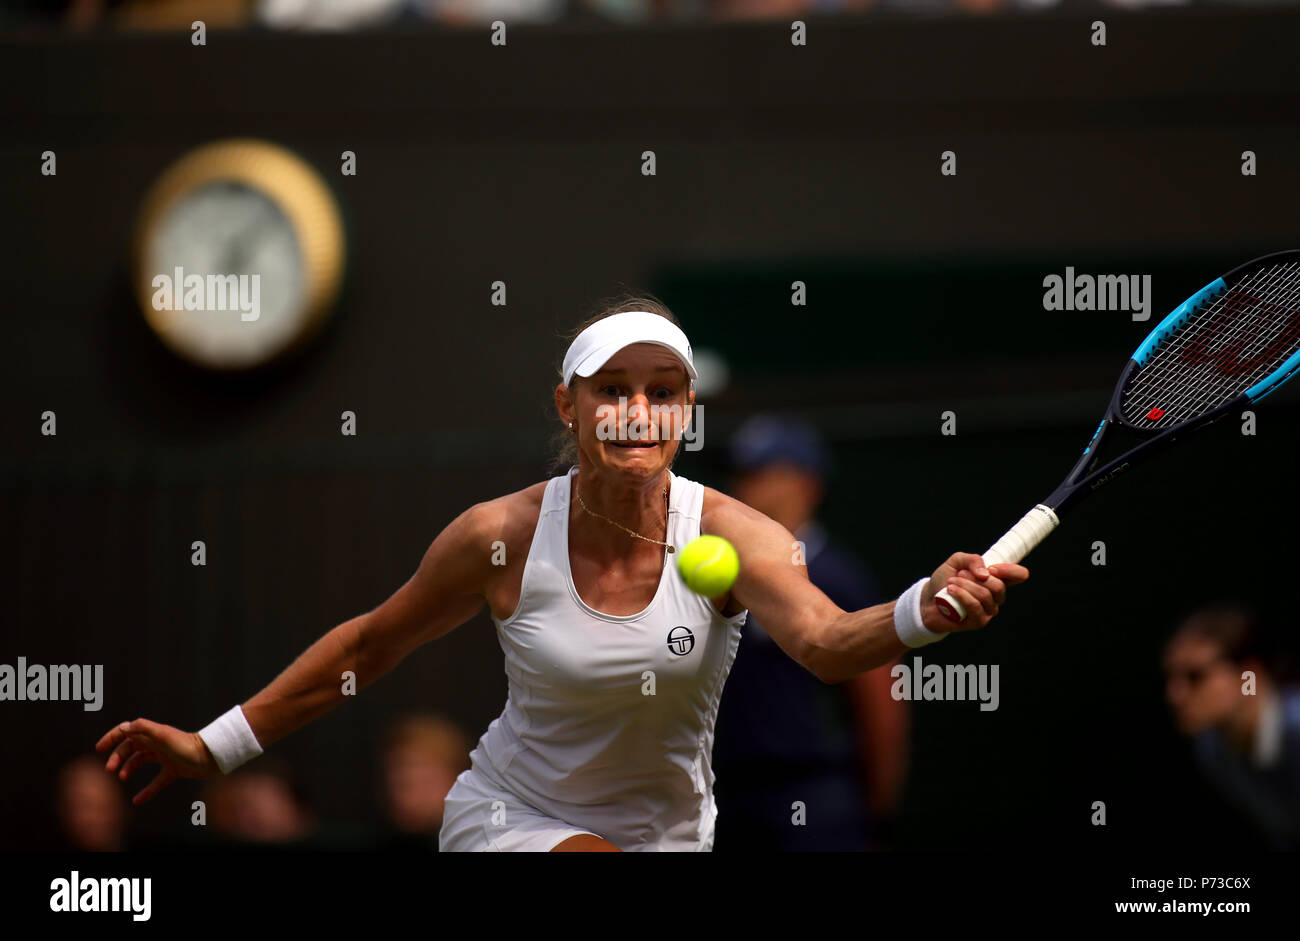 London, England - July 4th, 2018.  Wimbledon Tennis:  Ekaterina Makarova of Russia during her match against Number 2 seed Caroline Wozniacki of Denmark in the second round at Wimbledon today. Credit: Adam Stoltman/Alamy Live News Stock Photo